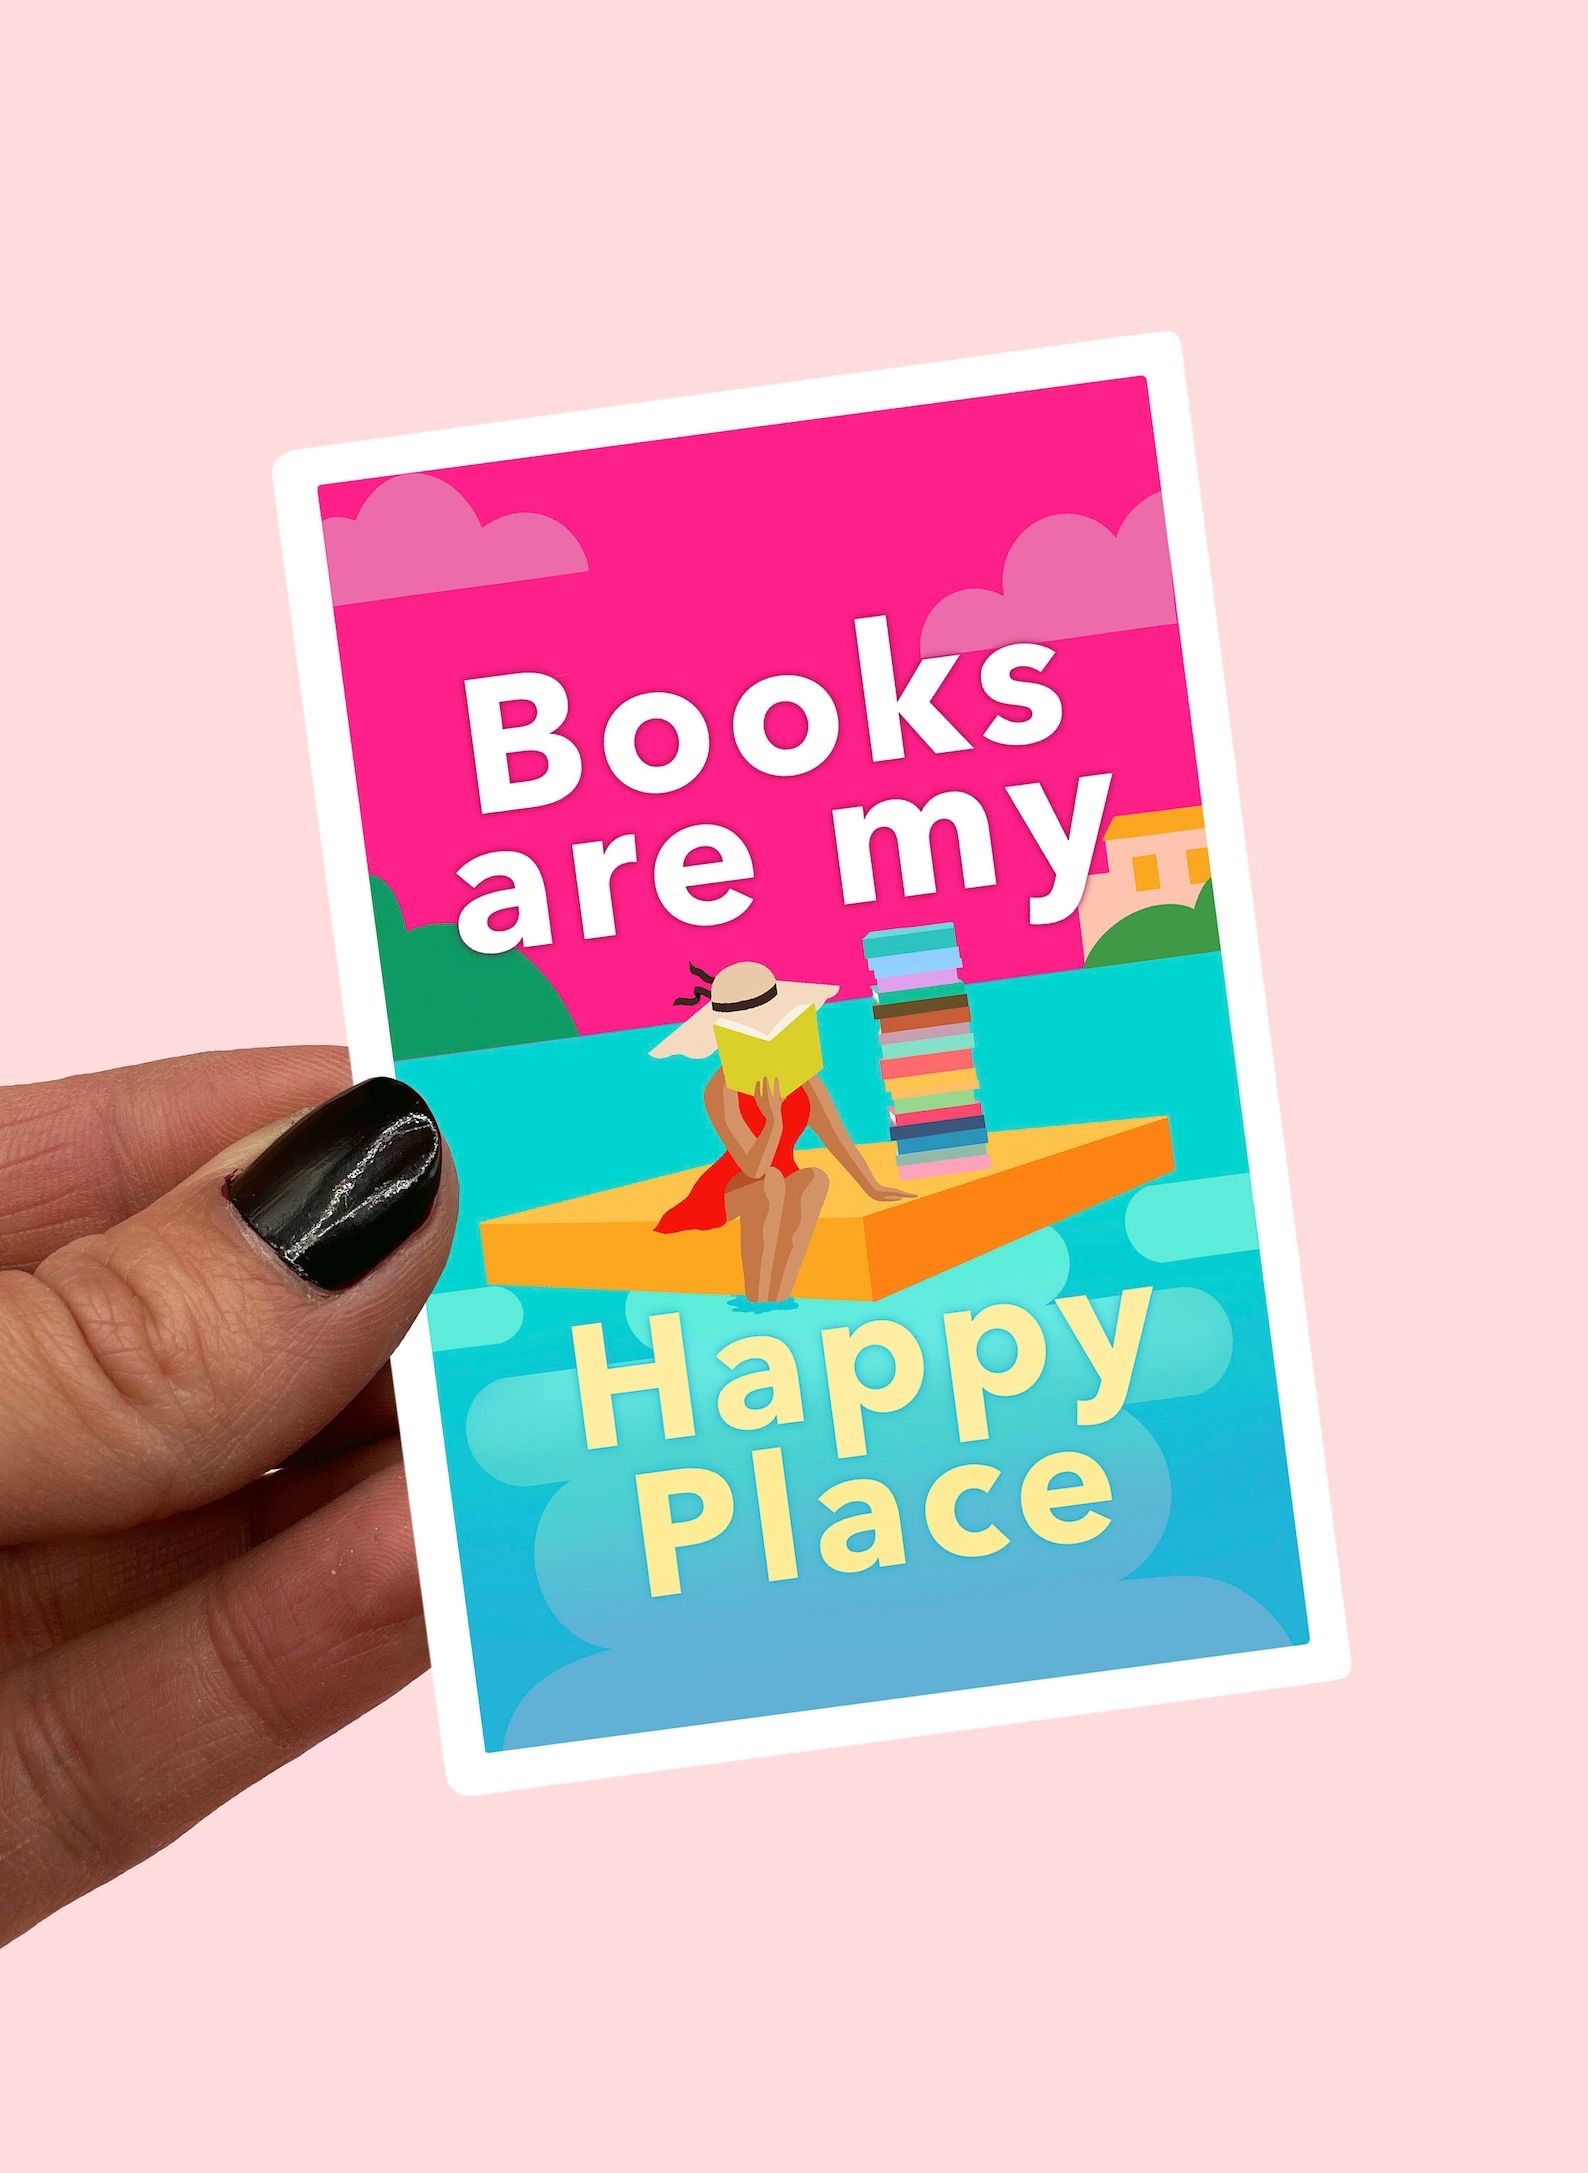 Books are my Happy Place Sticker held in front of a pink background.